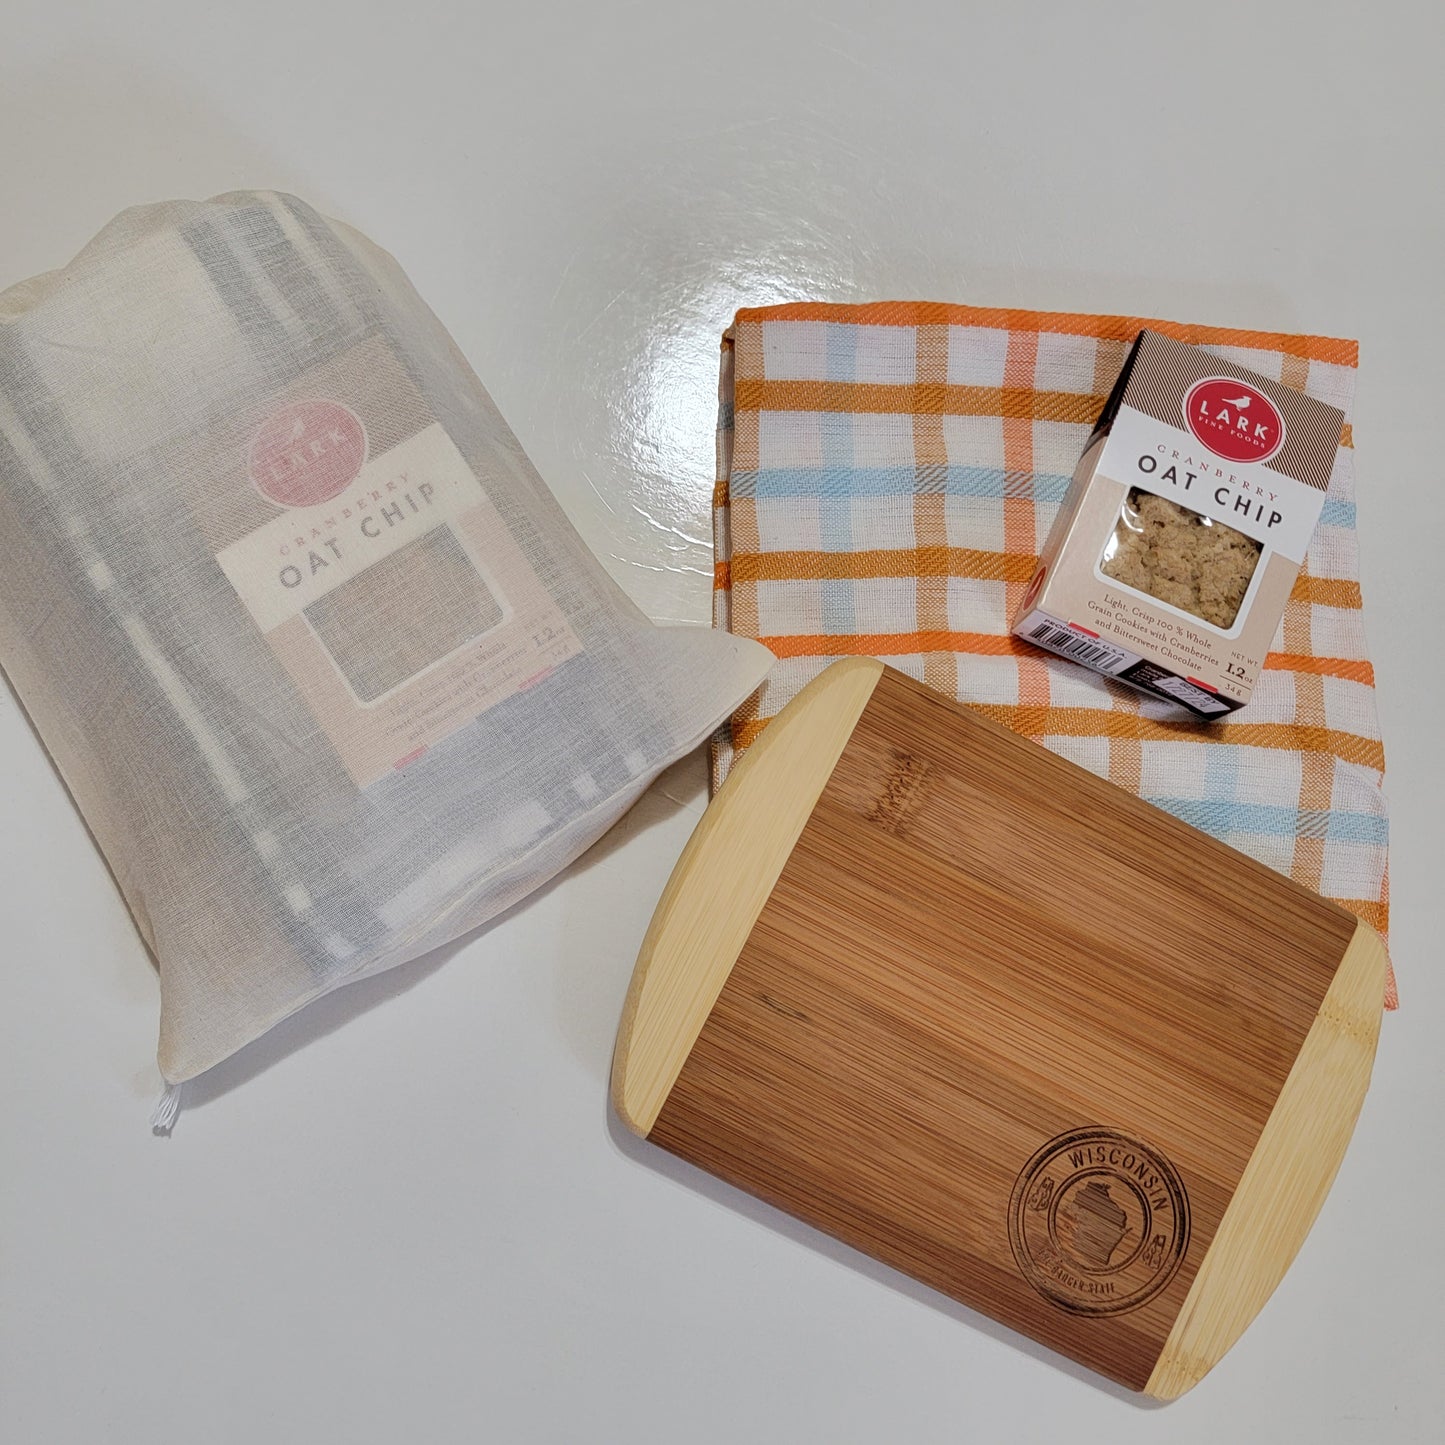 Wisconsin Home gift set